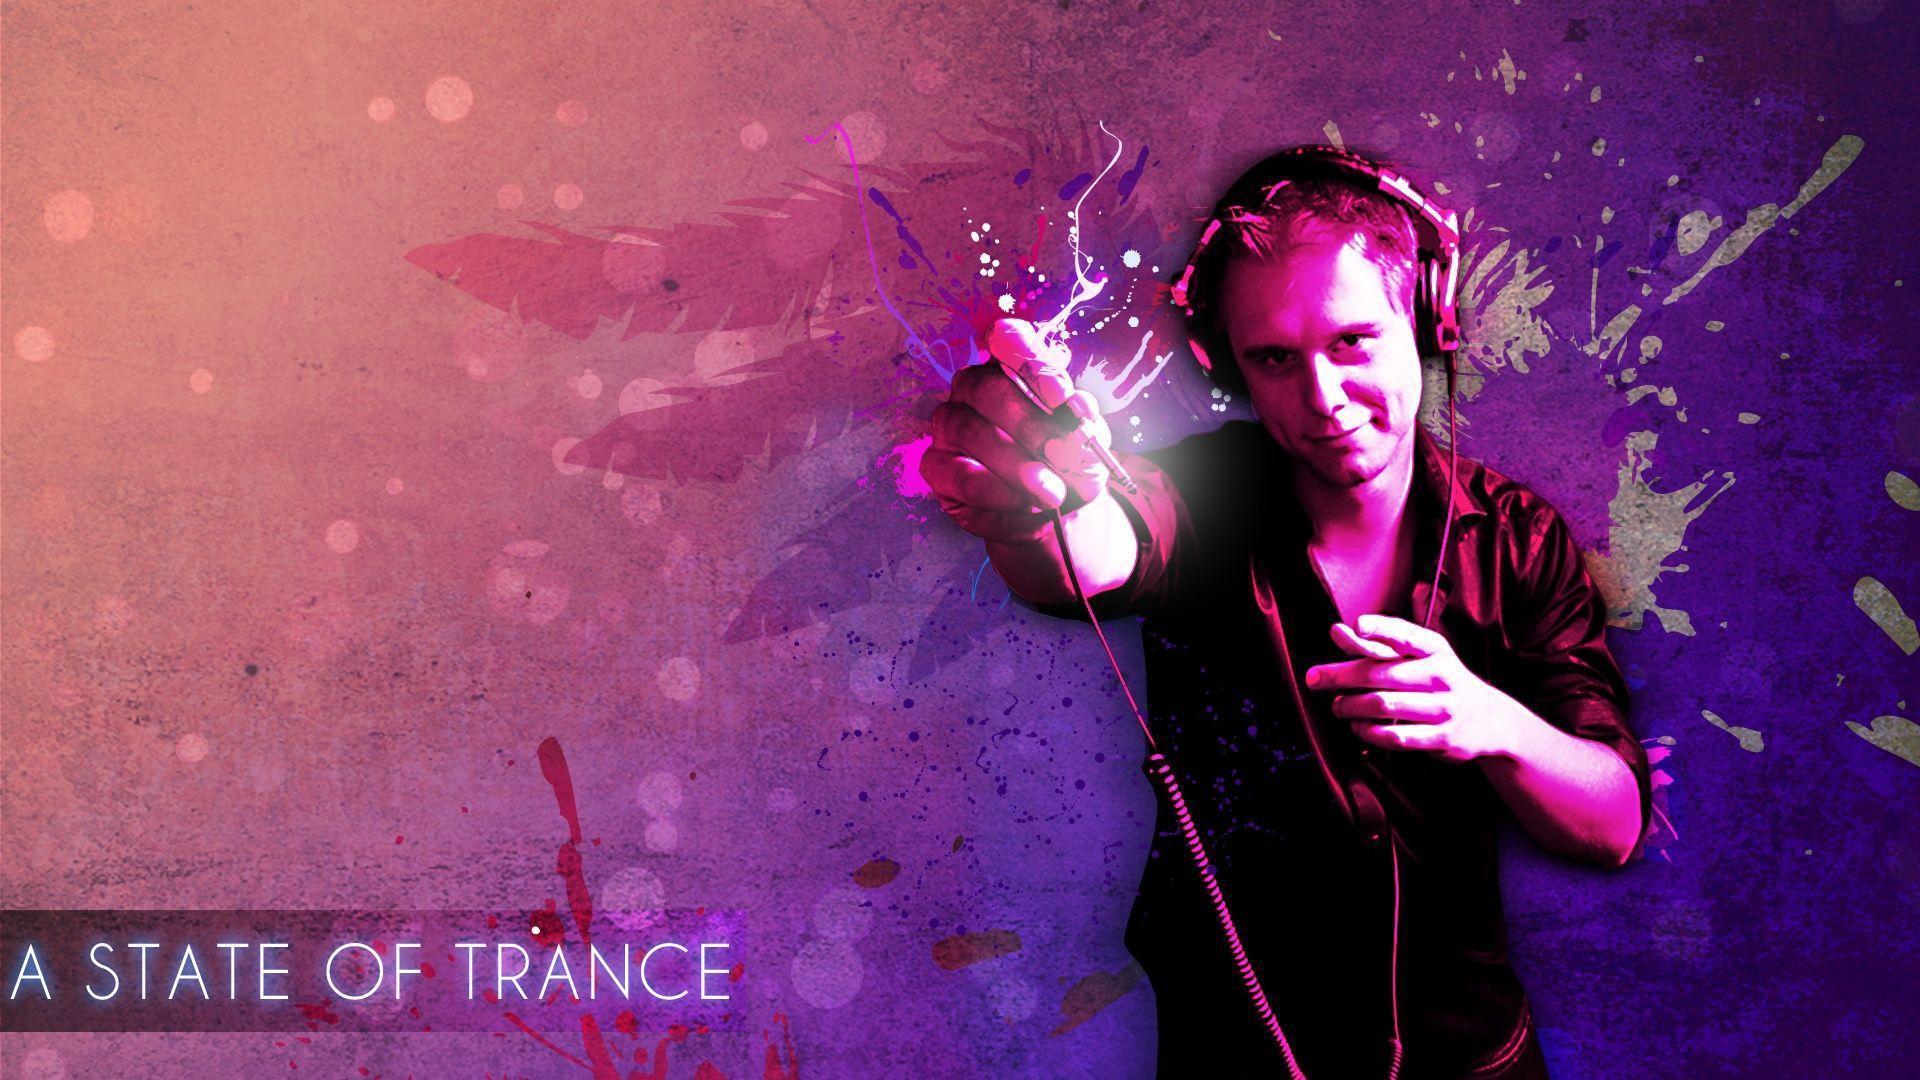 A State Of Trance Wallpaper